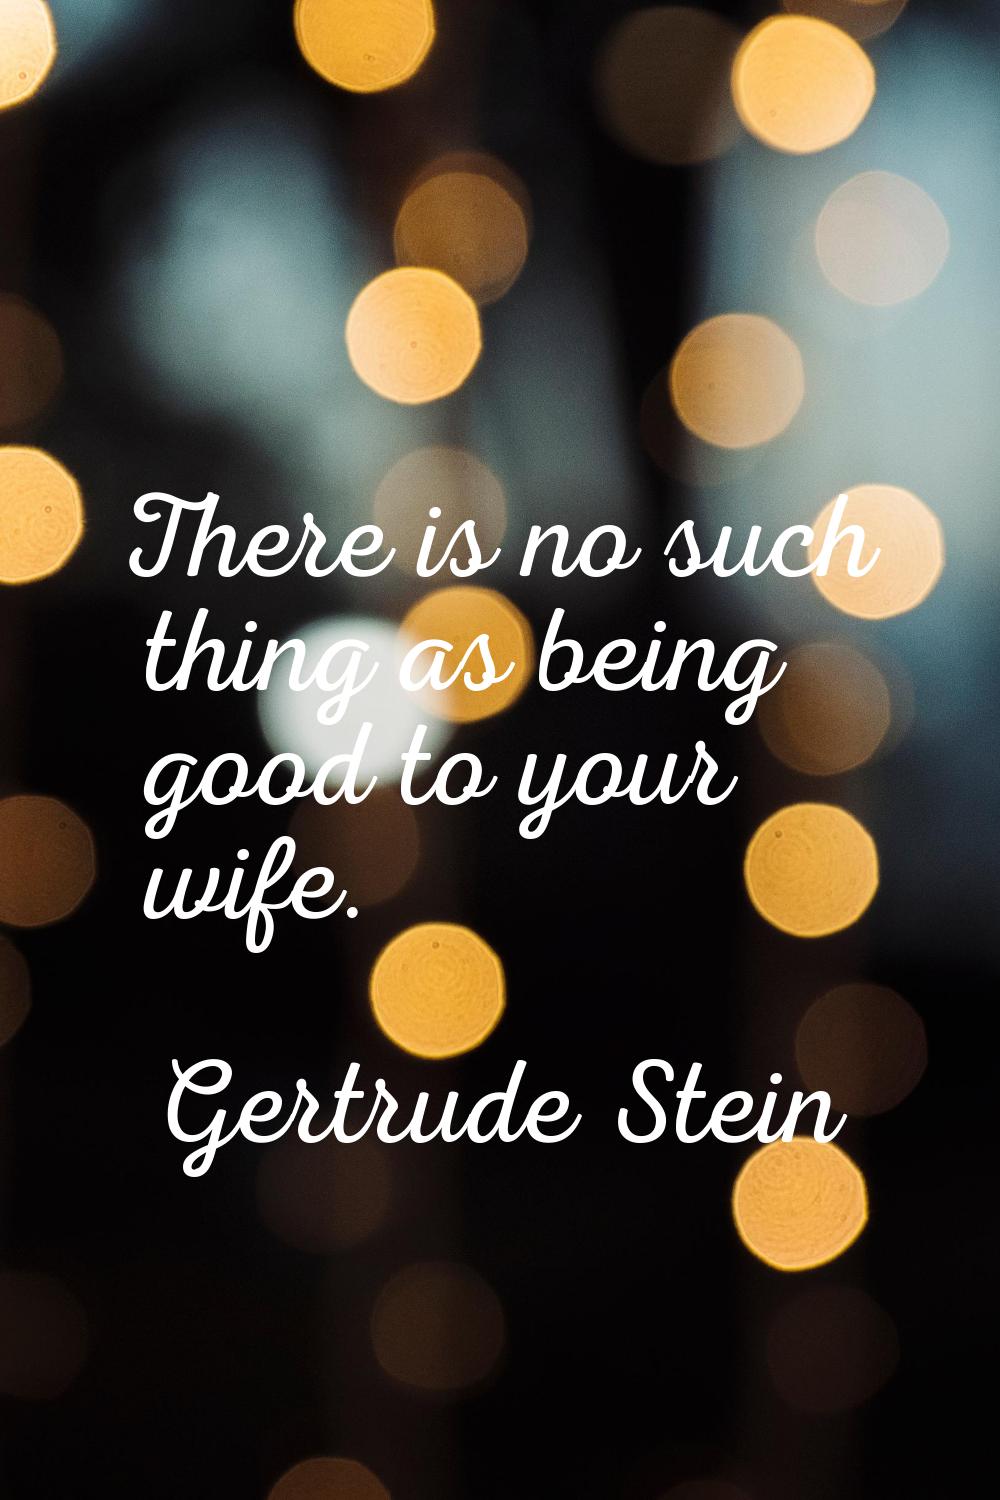 There is no such thing as being good to your wife.